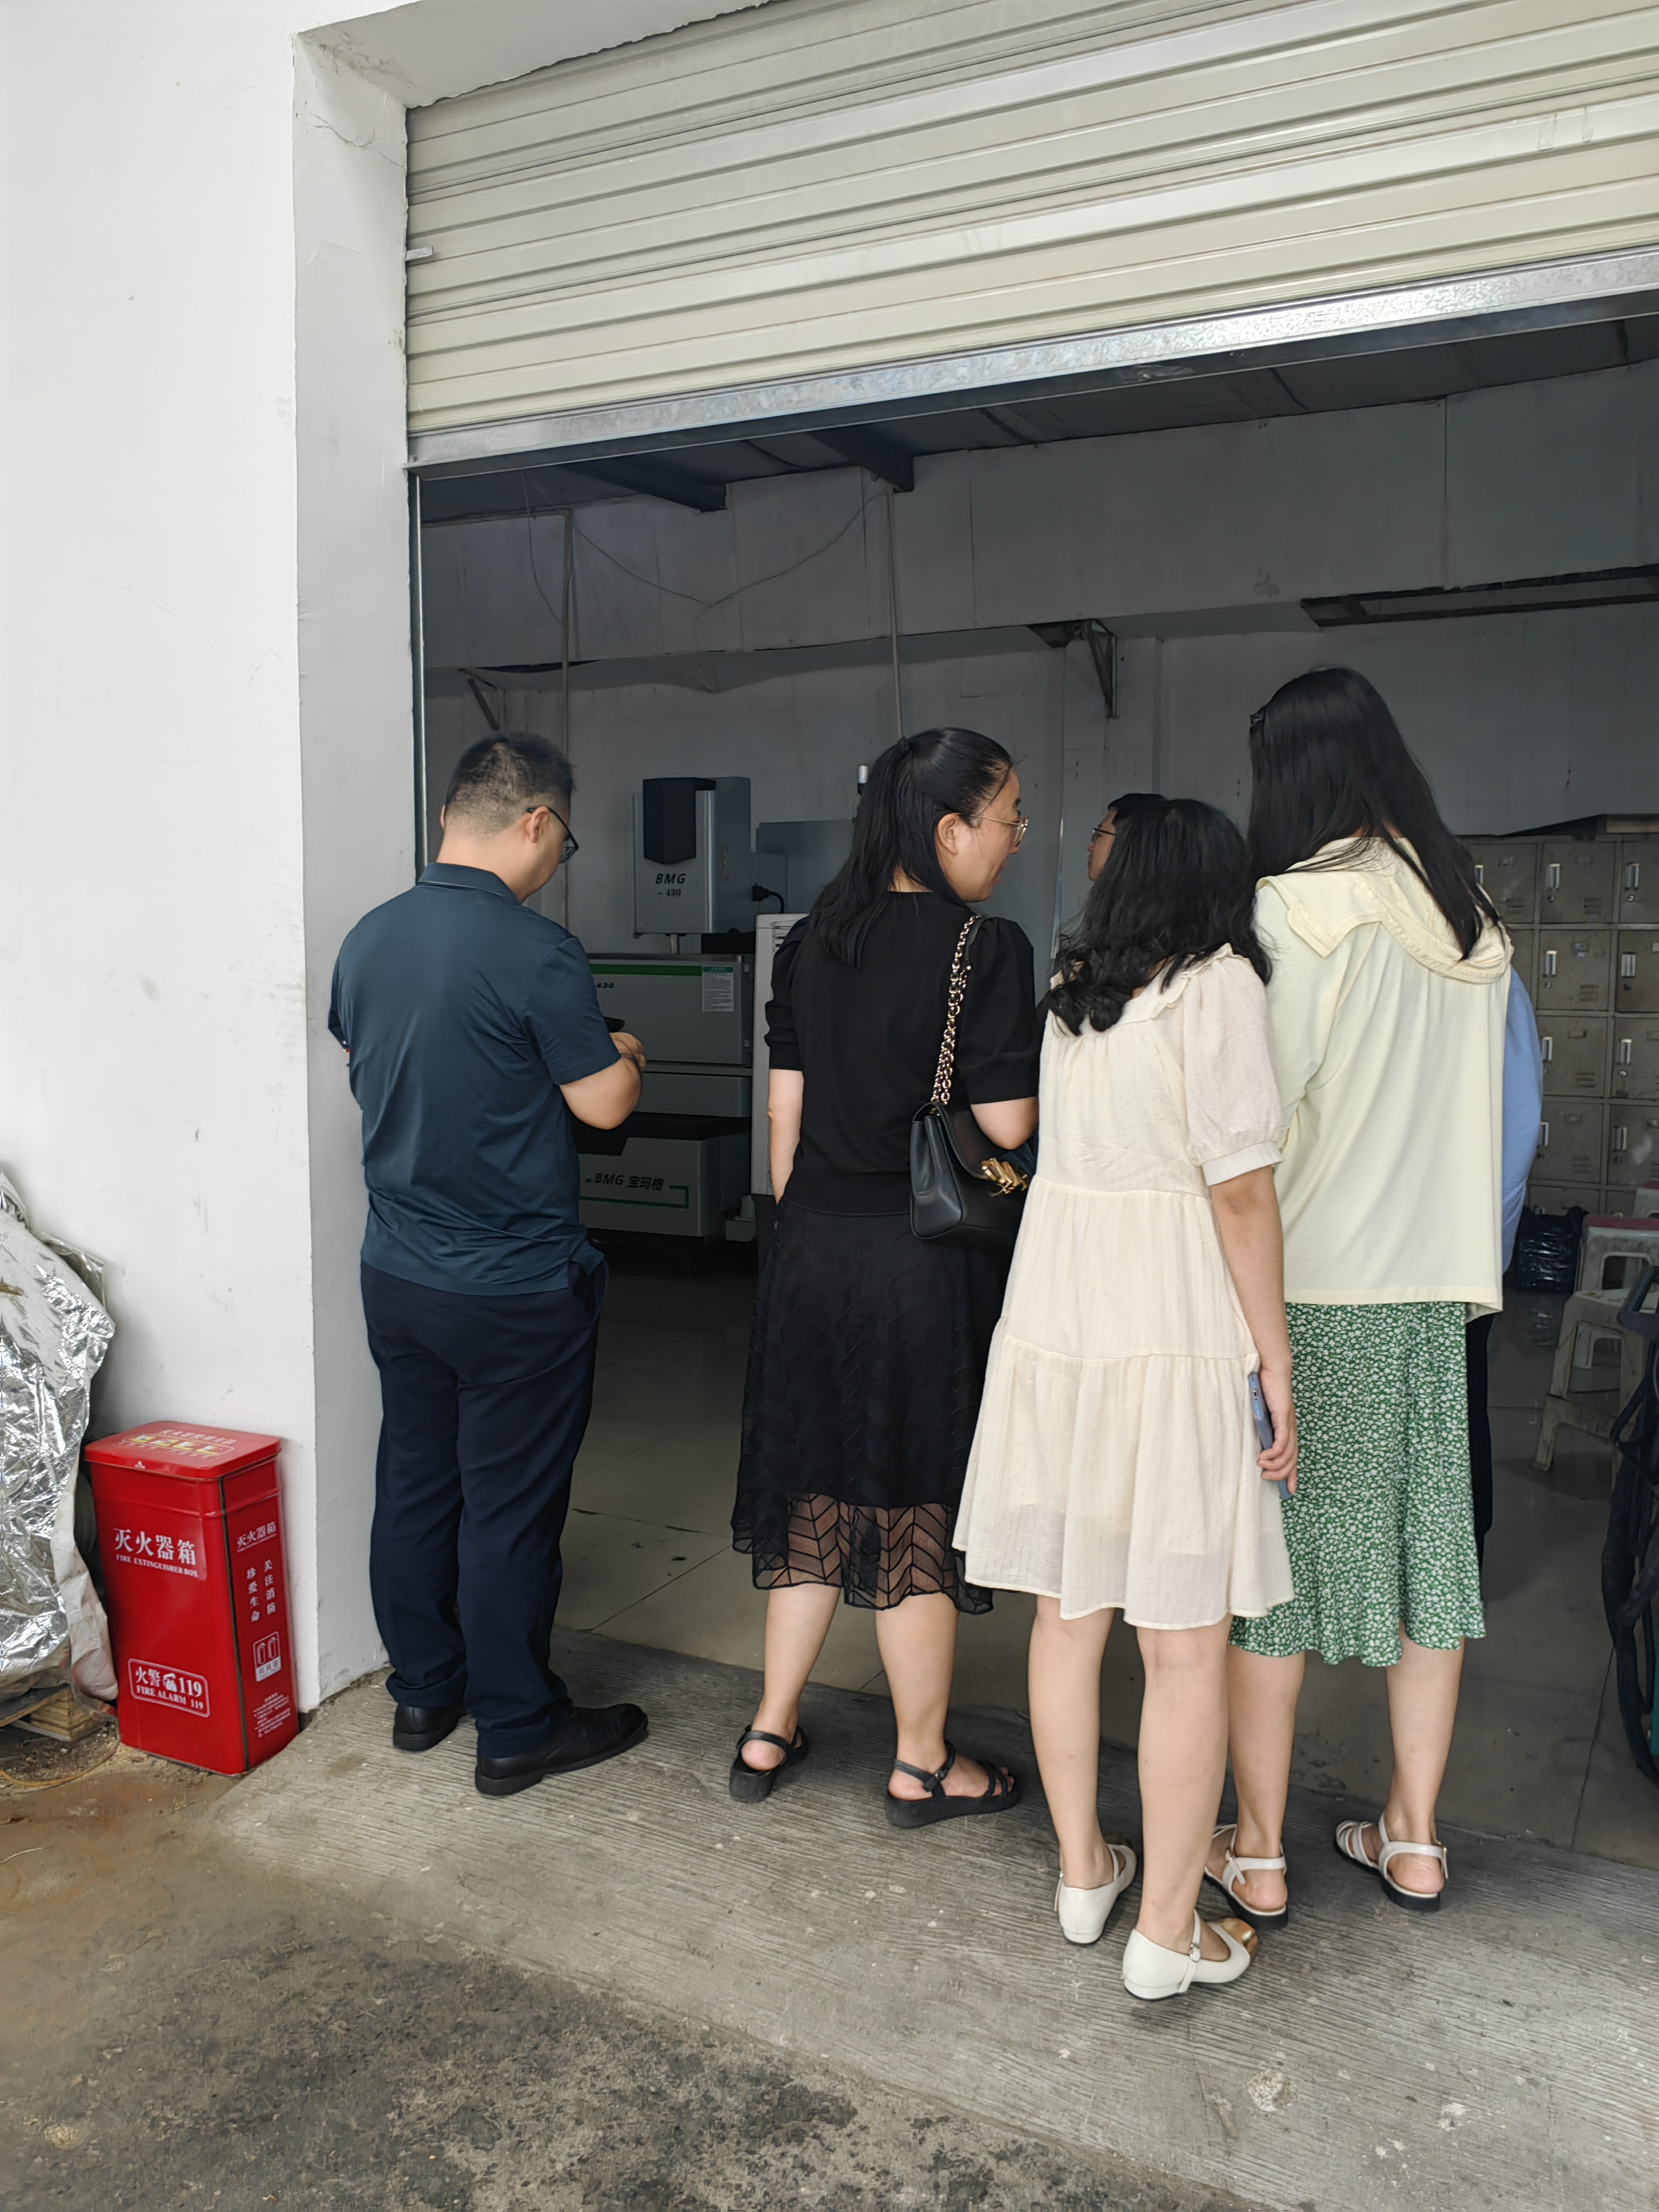 Government leaders of Chenghua District of Chengdu visited the company for investigation